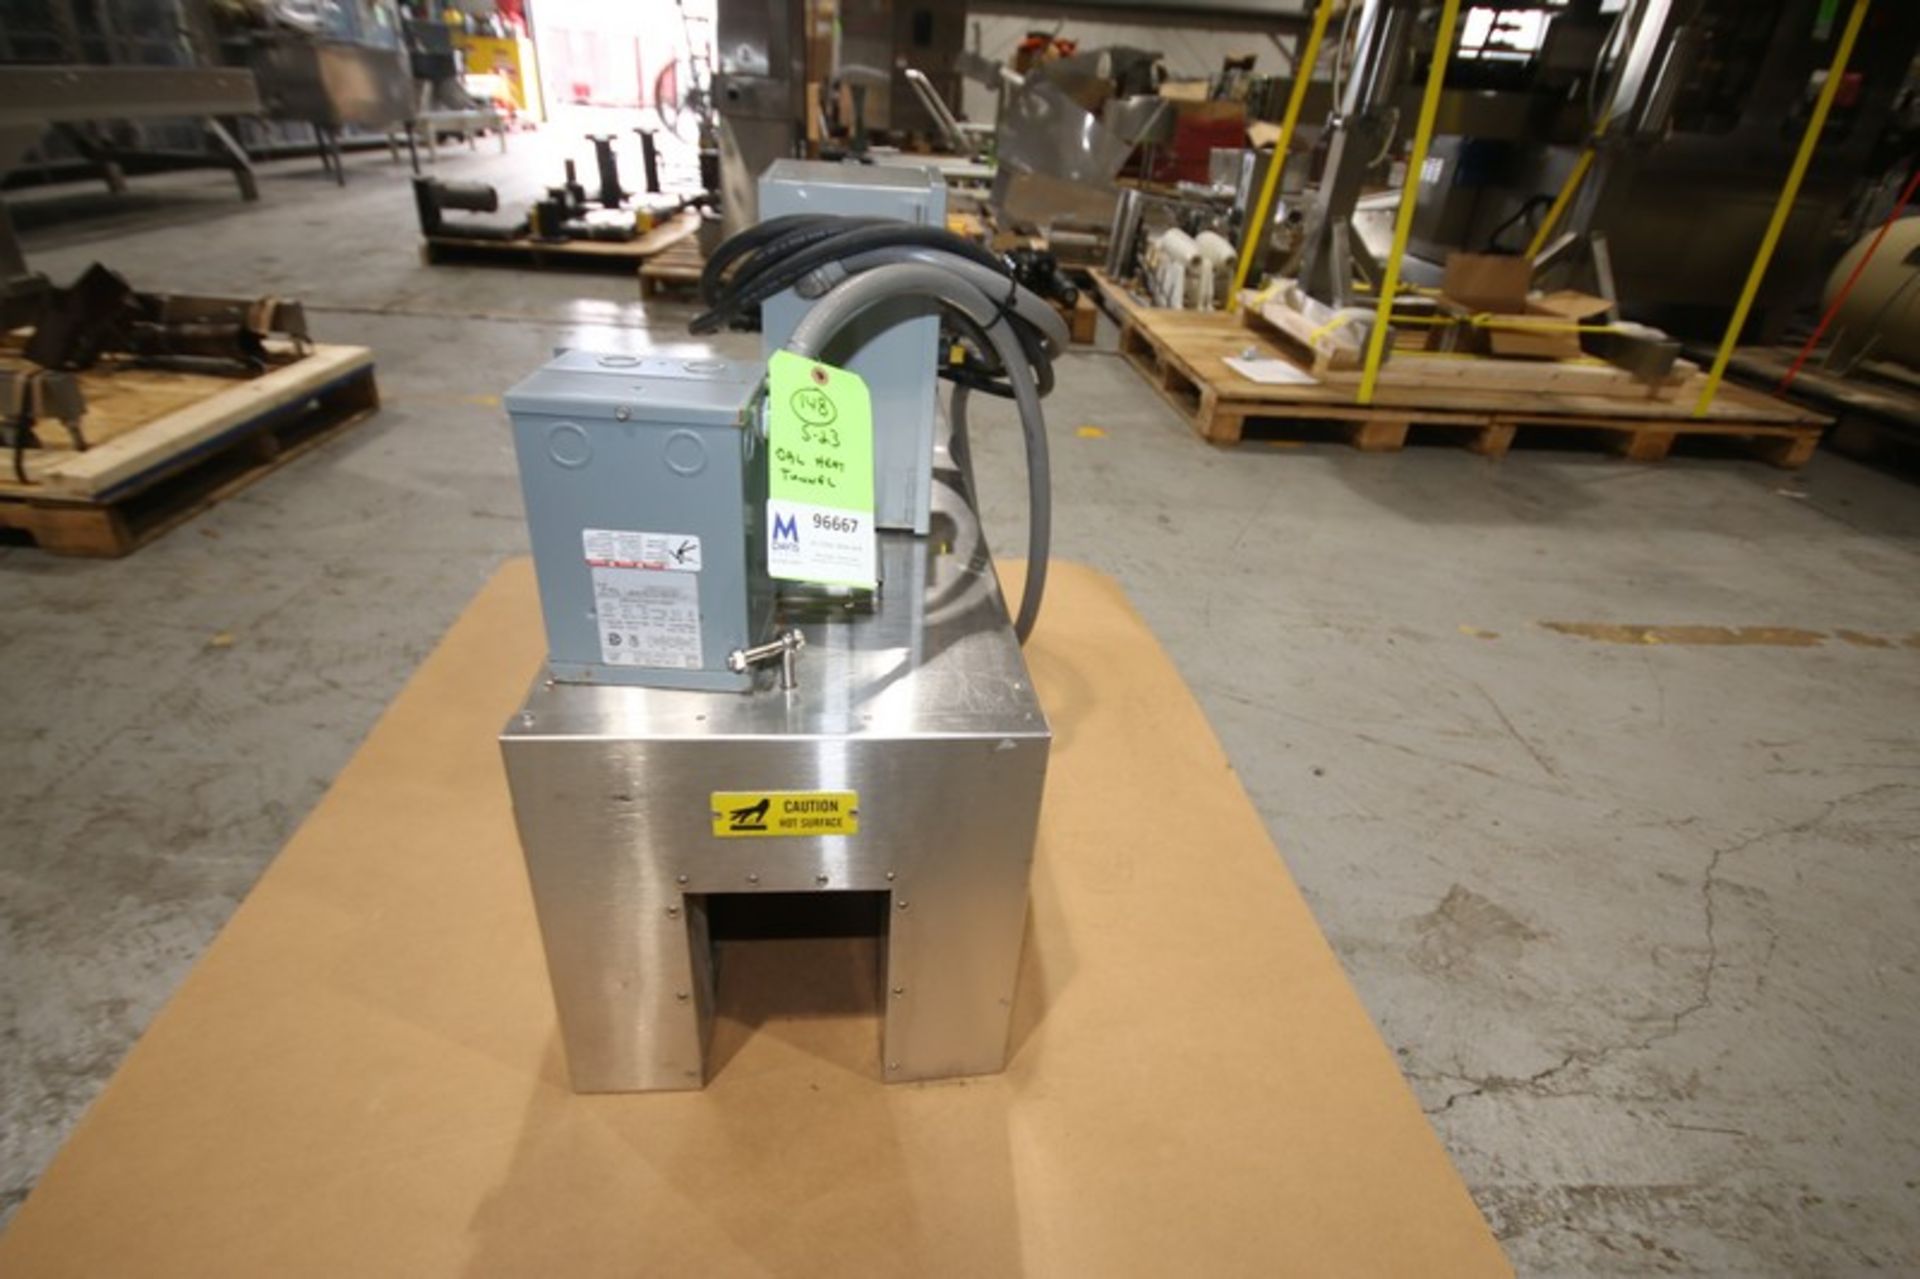 OAL 37" L S/S Shrink Heat Tunnel, Model FIRO/RE-6/9/36-6L SN 16140-1, with 6" W x 9" H Product - Image 2 of 4